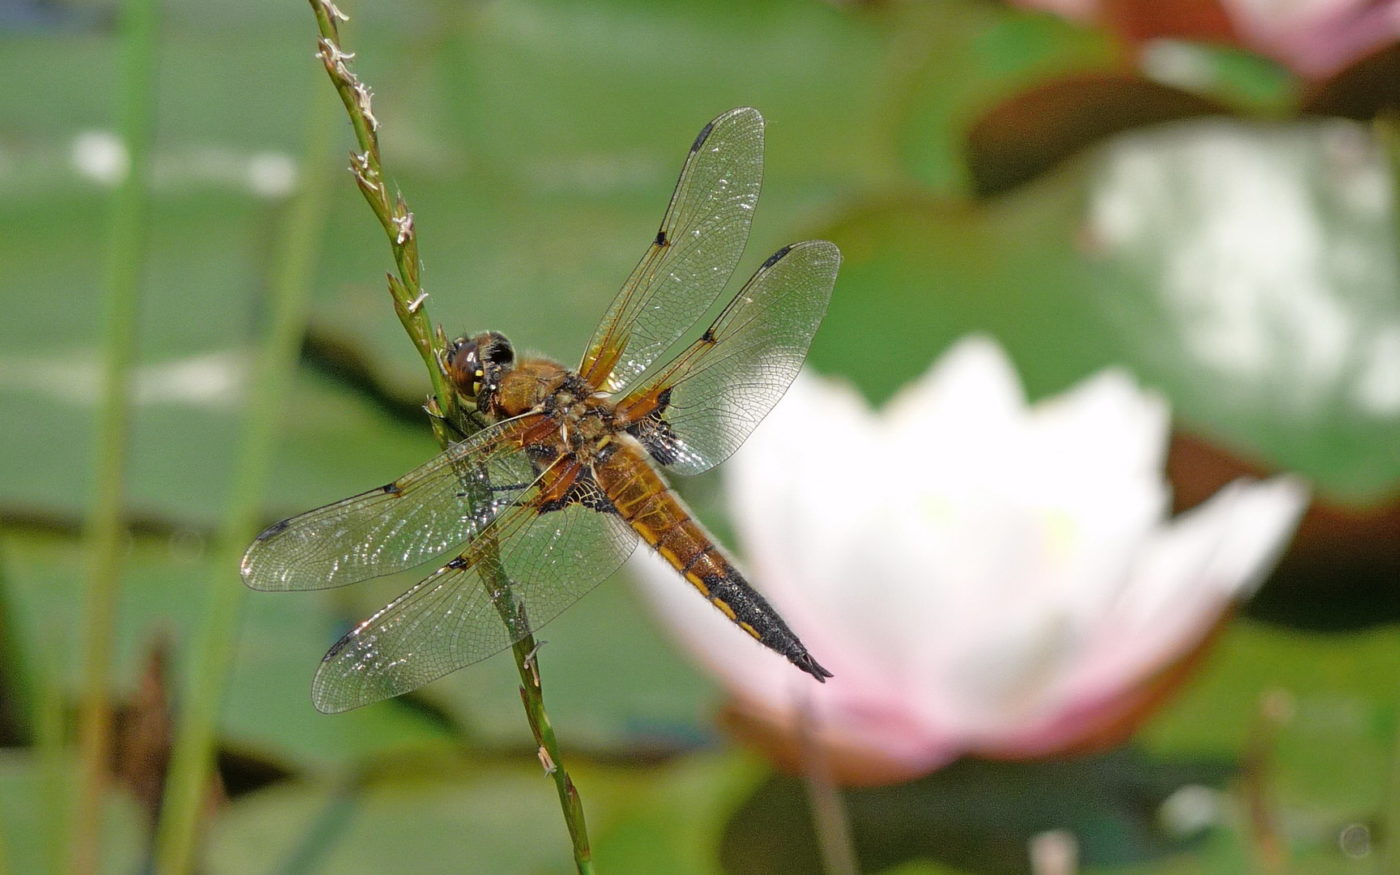 Four-Spotted Chaser Dragonfly, Libellula quadrimaculata, by Water Lilies